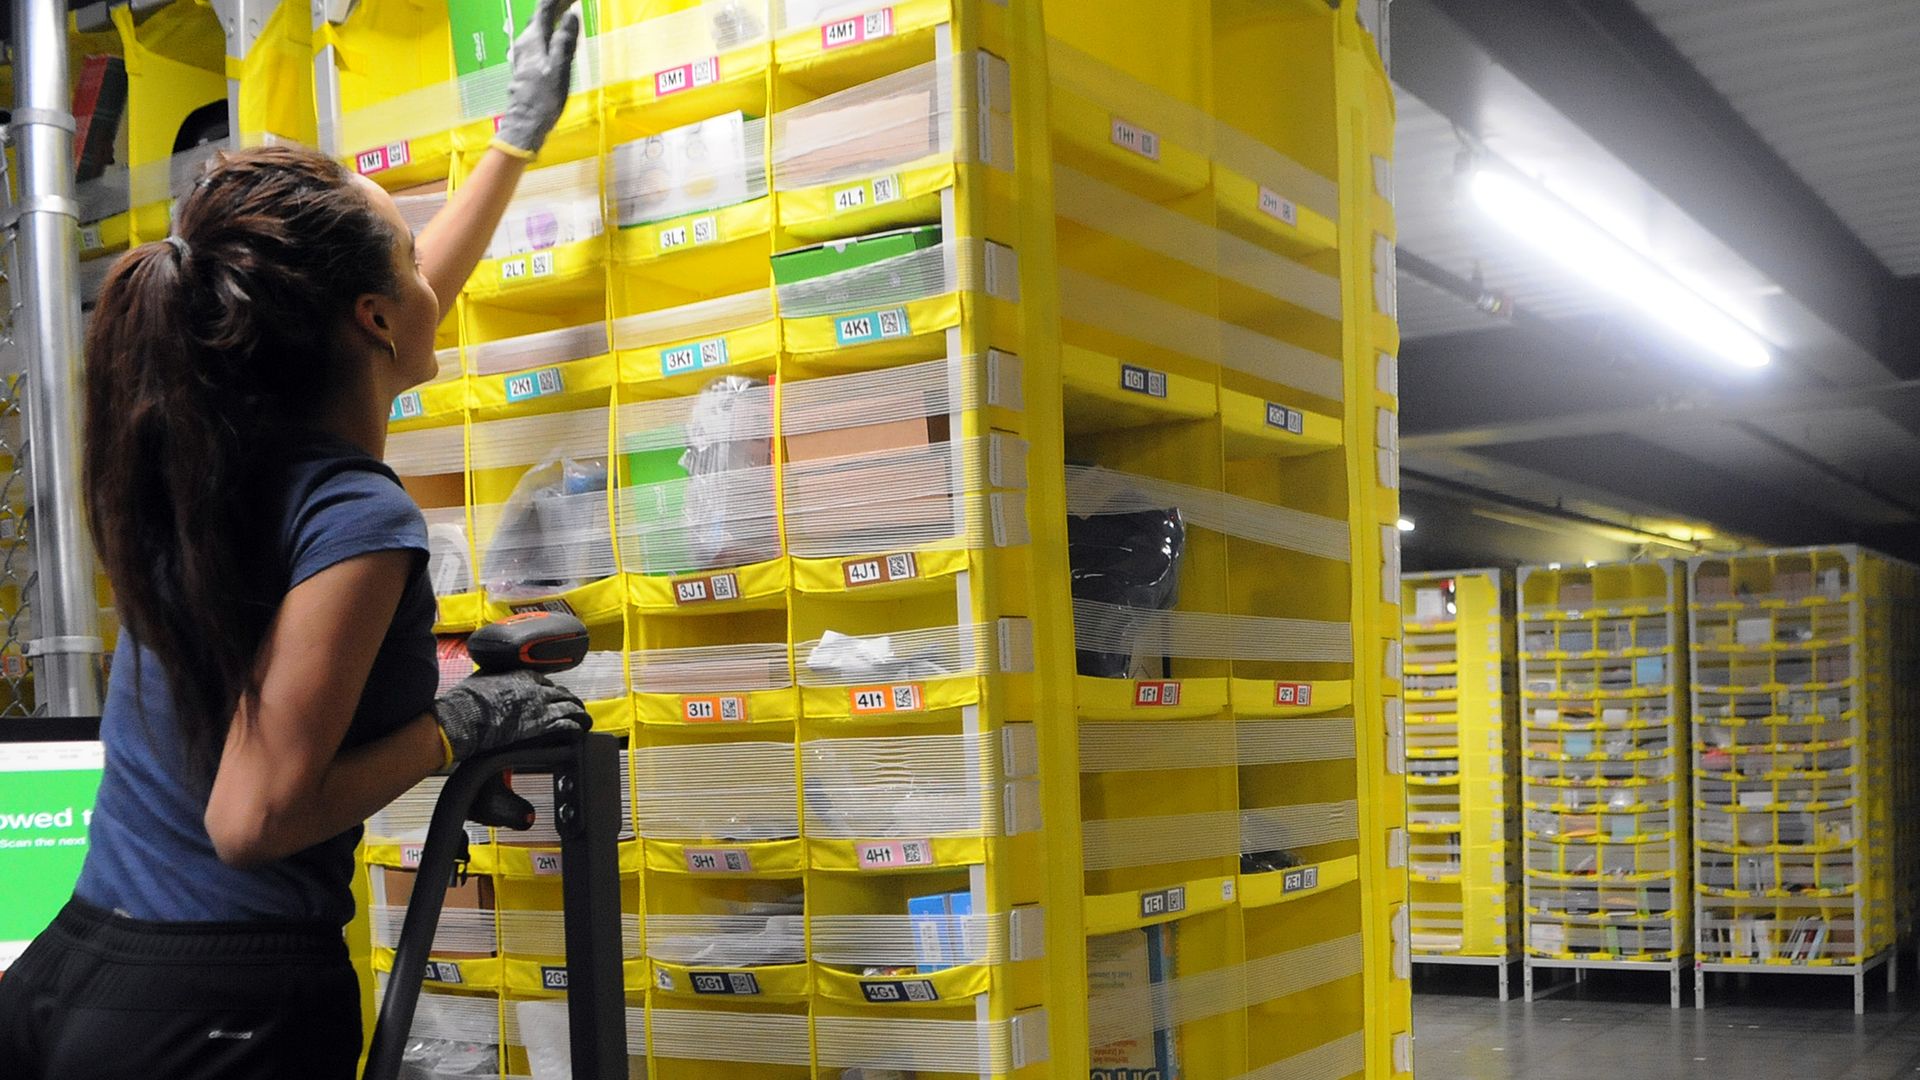 A woman reaches for an item on a yellow shelf in a warehouse